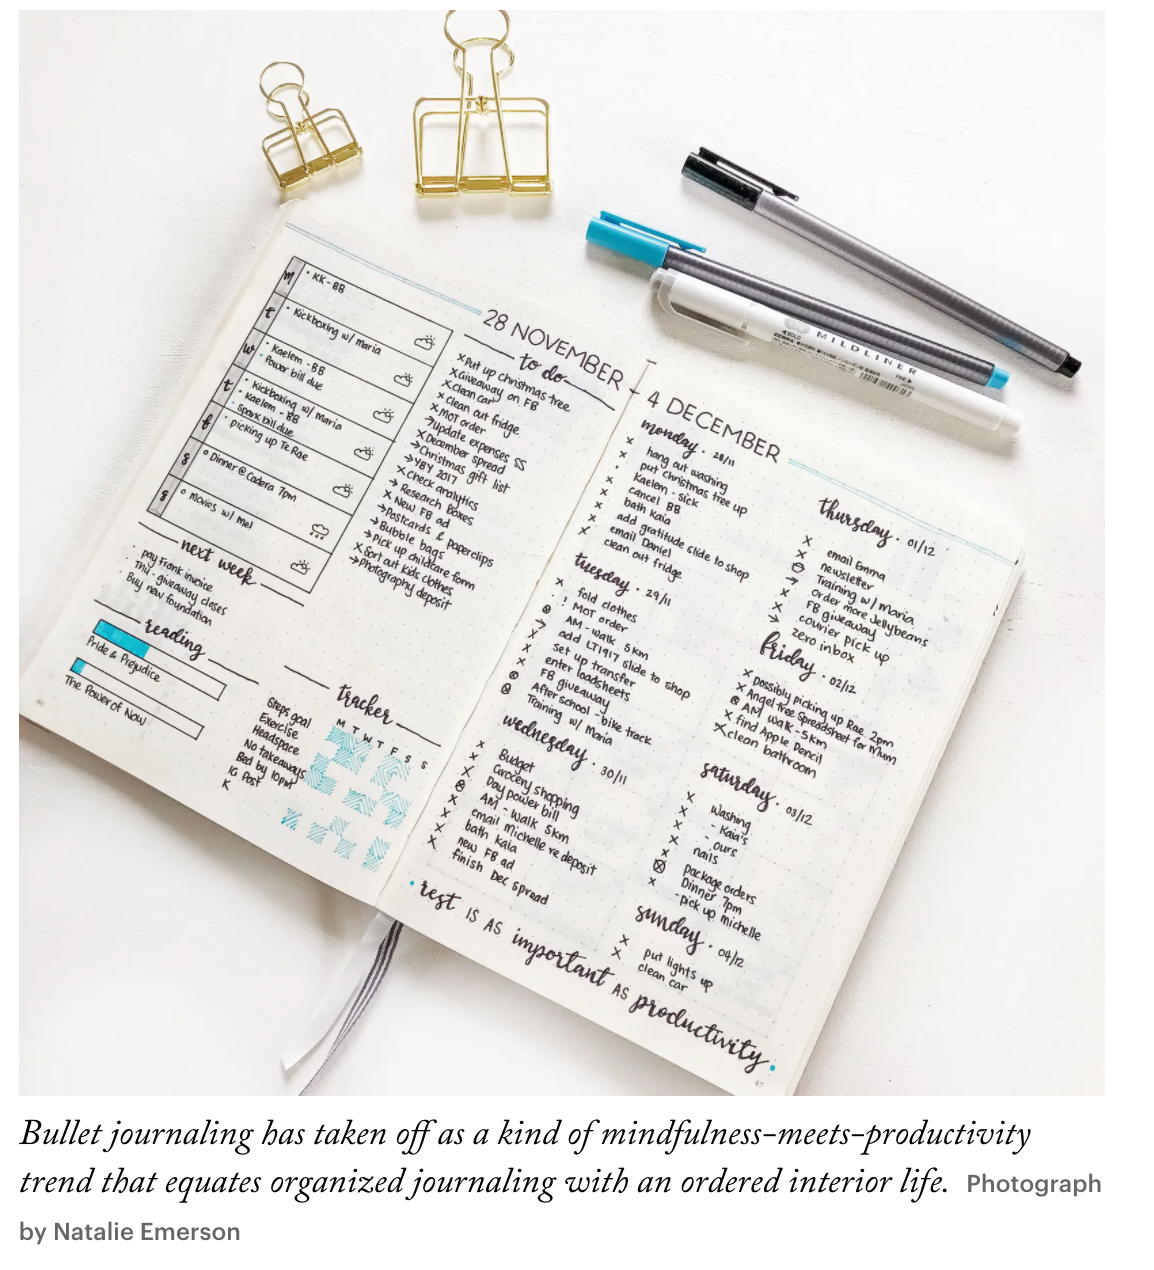 The New Yorker. Can Bullet Journaling Save You? 